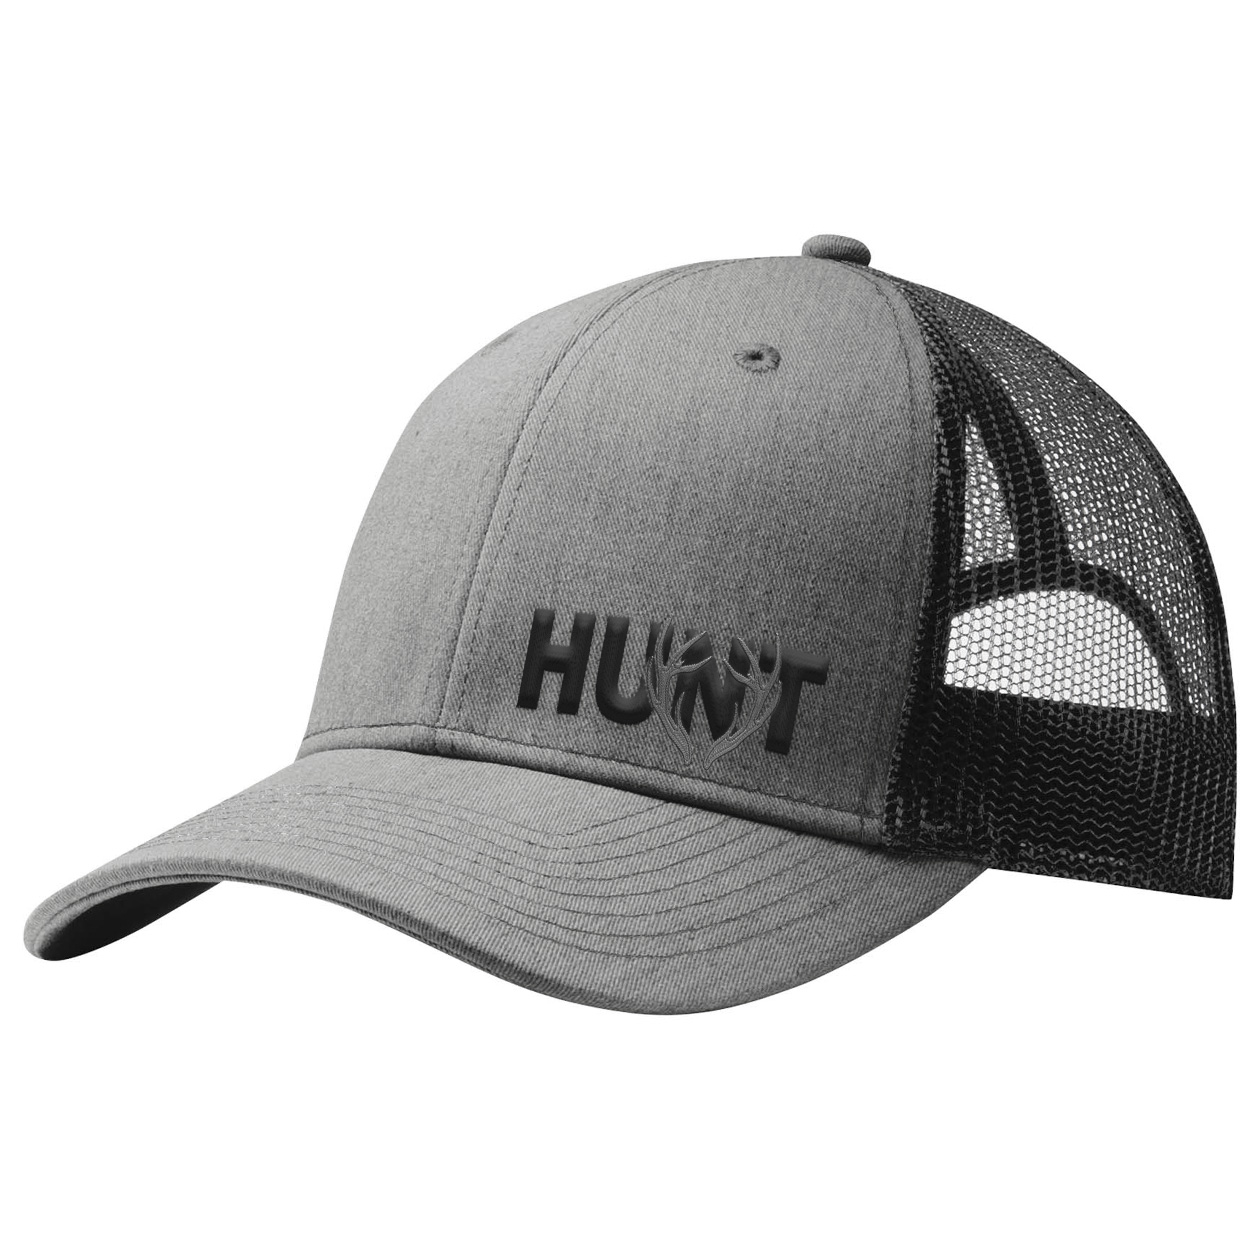 Hunt Rack Logo Night Out Pro Embroidered Snapback Trucker Hat Heather Gray/Black